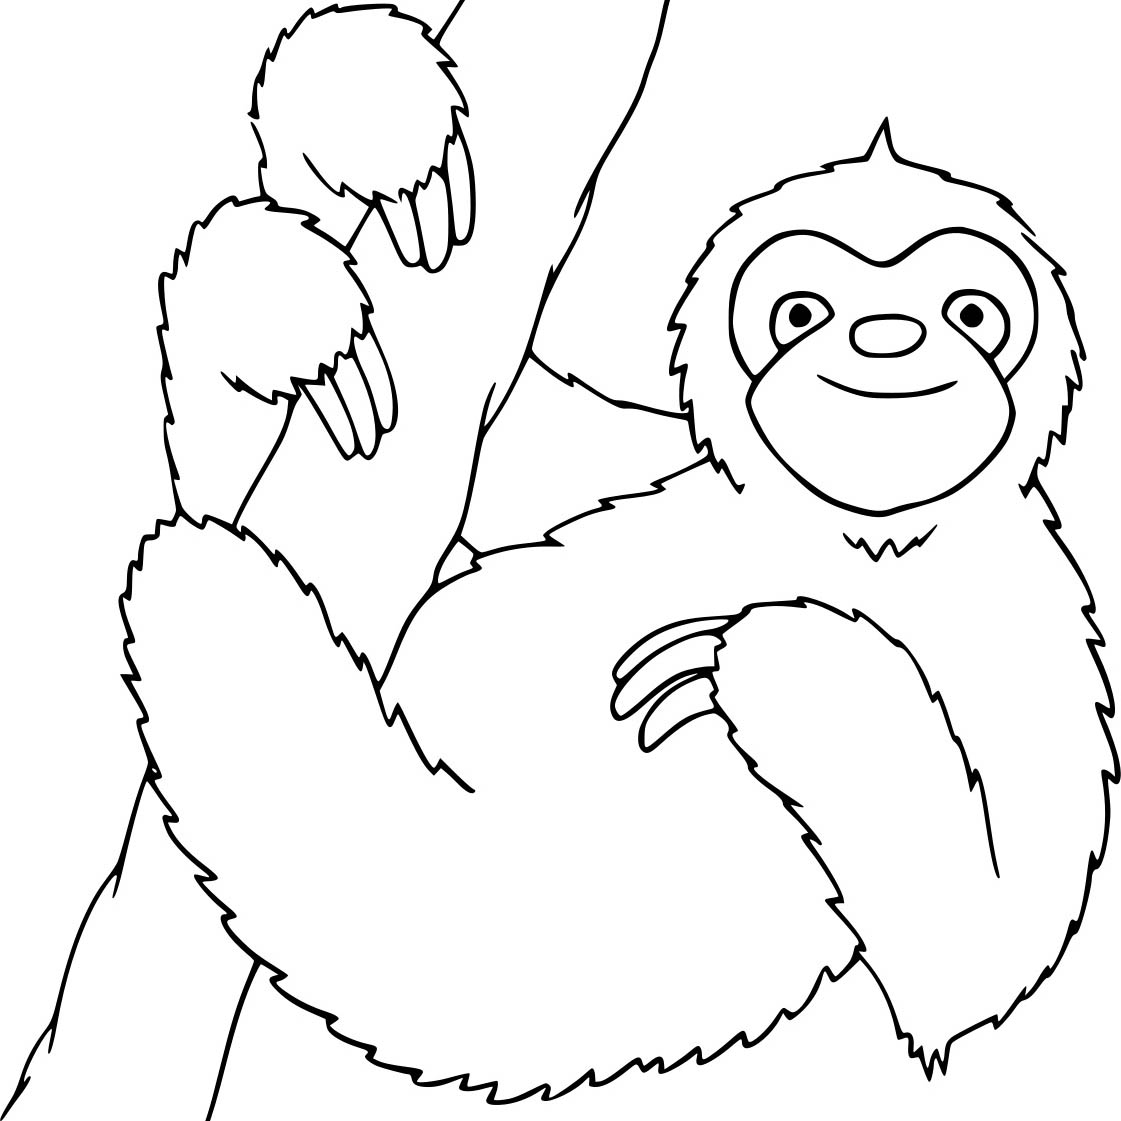 Free Cartoon Three Toed Sloth Coloring Pages printable